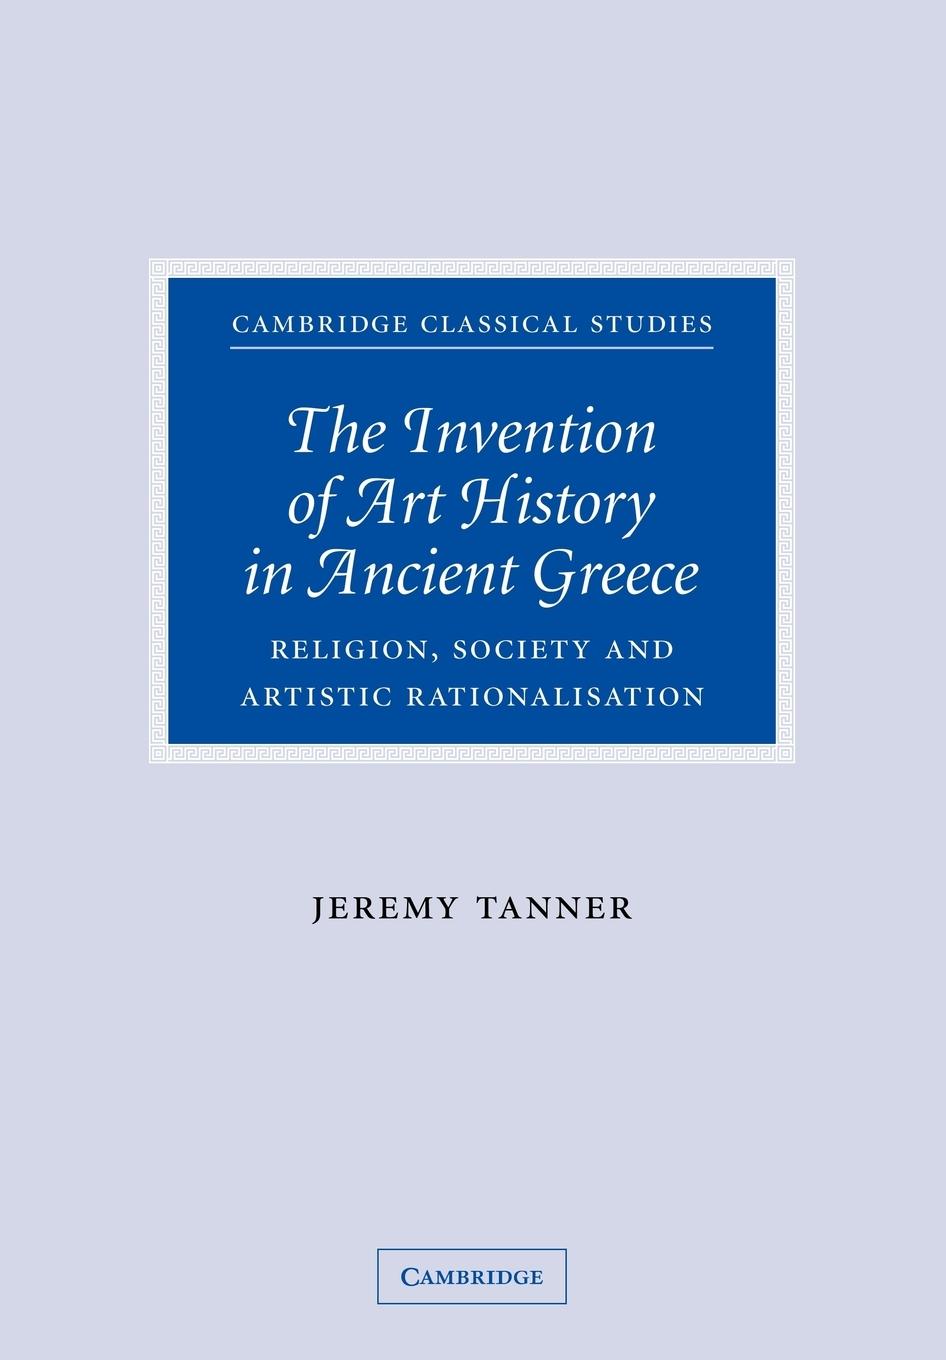 The Invention of Art History in Ancient Greece - Tanner, Jeremy